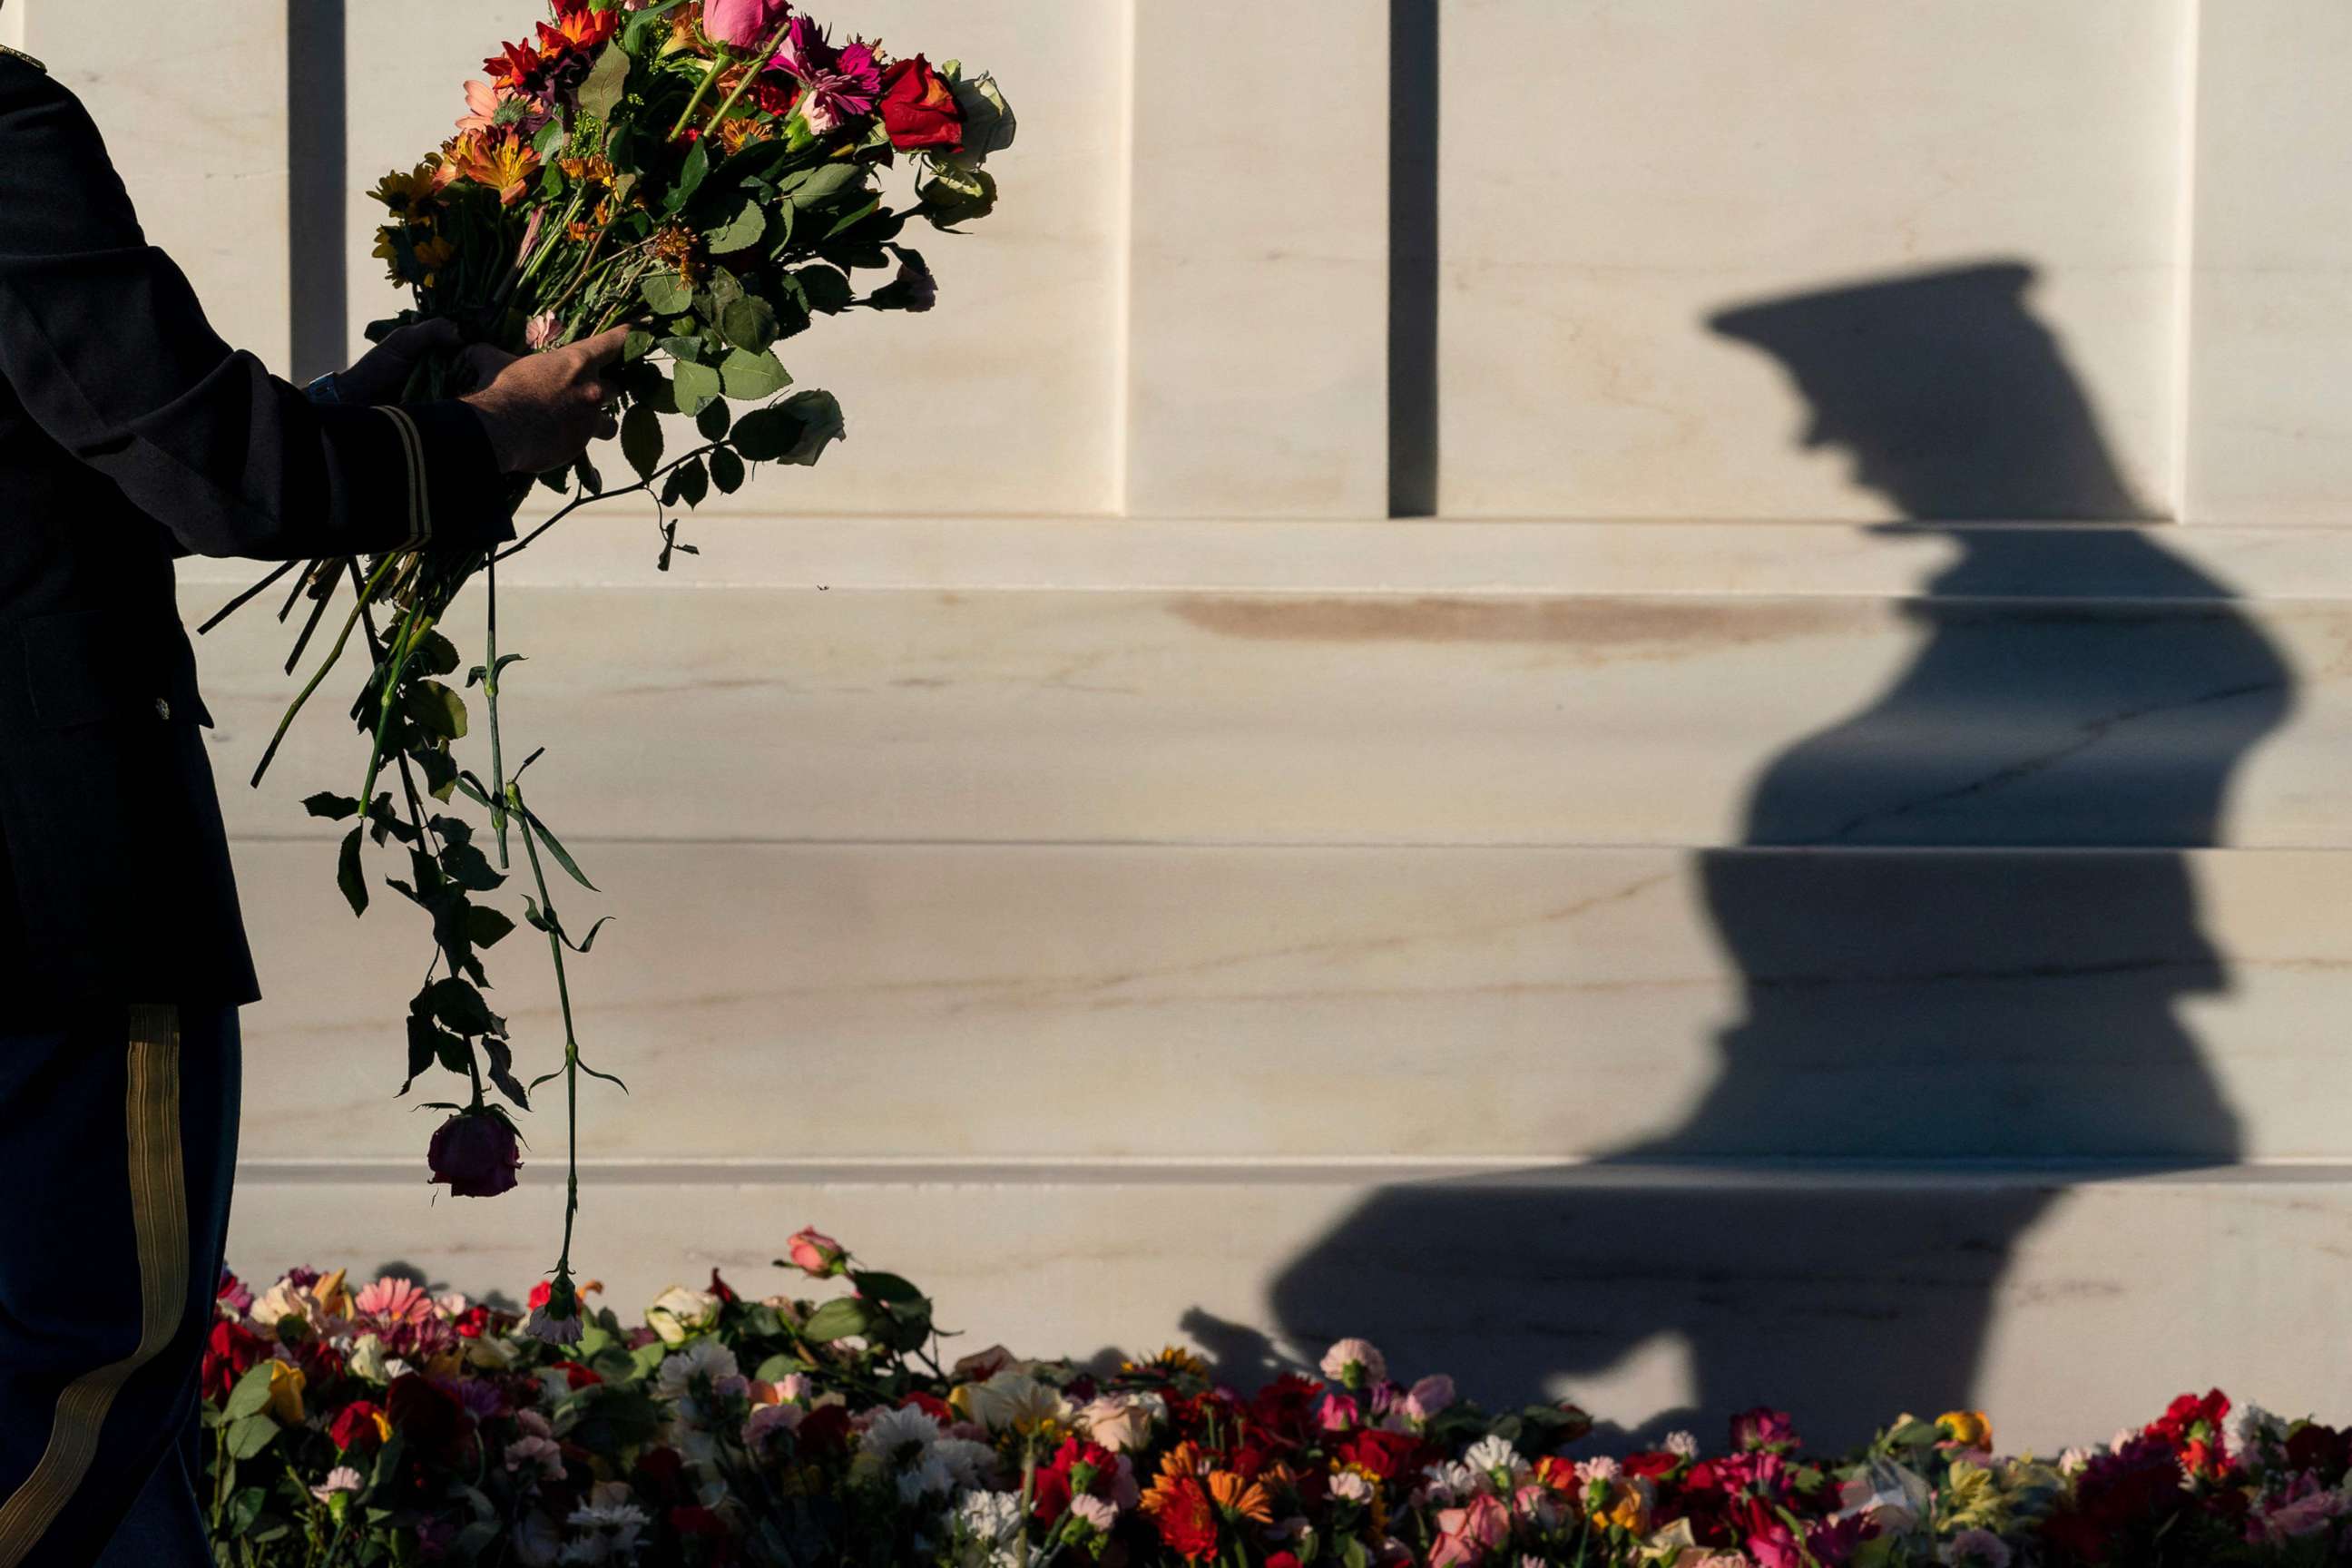 PHOTO: A soldier with the 3rd US Infantry Regiment, known as "The Old Guard," moves flowers during a centennial commemoration event at the Tomb of the Unknown Soldier, in Arlington National Cemetery, in Arlington, Va., Nov. 9, 2021.